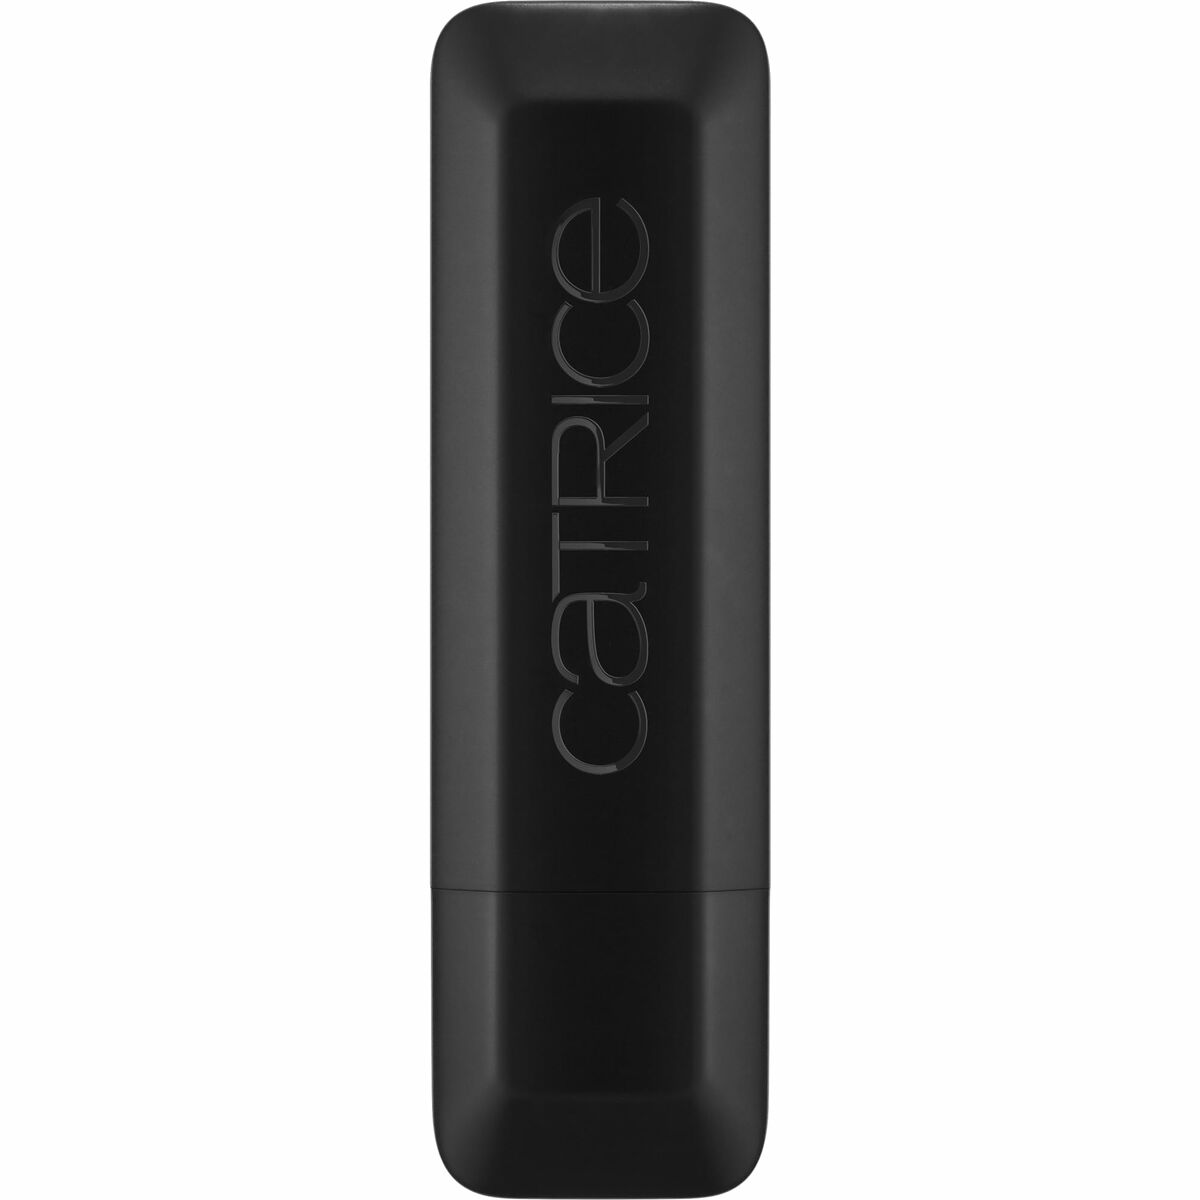 Lip balm Catrice Scandalous Matte Nº 080 Casually overdressed 3,5 g